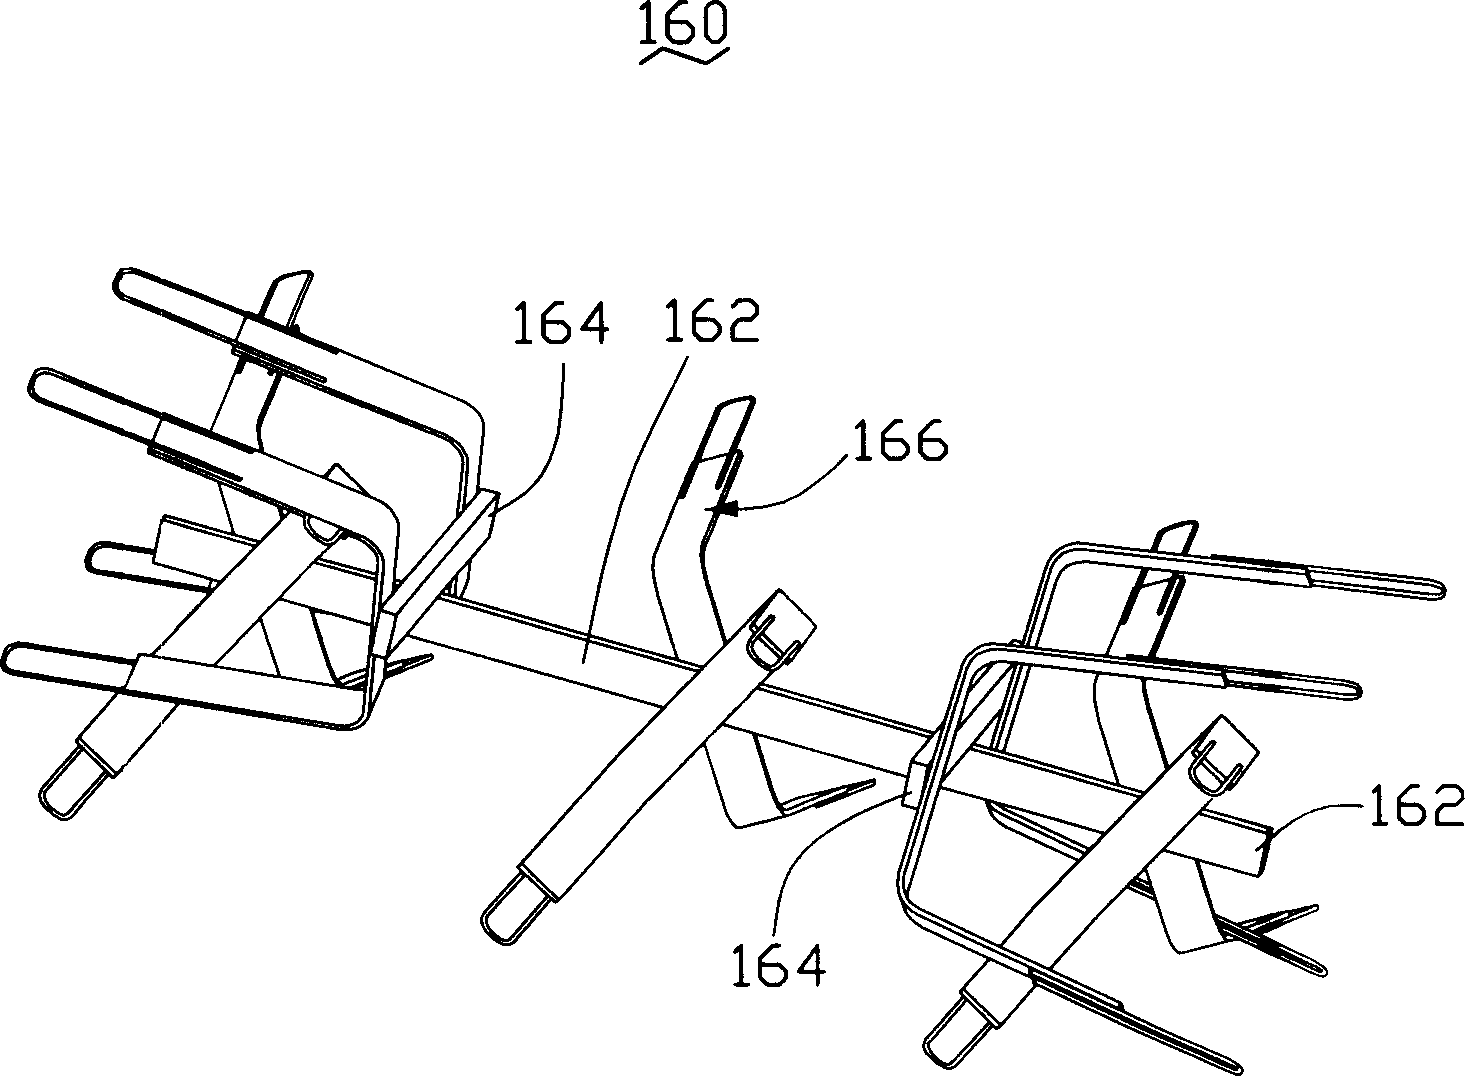 Fixture and clamp applying same